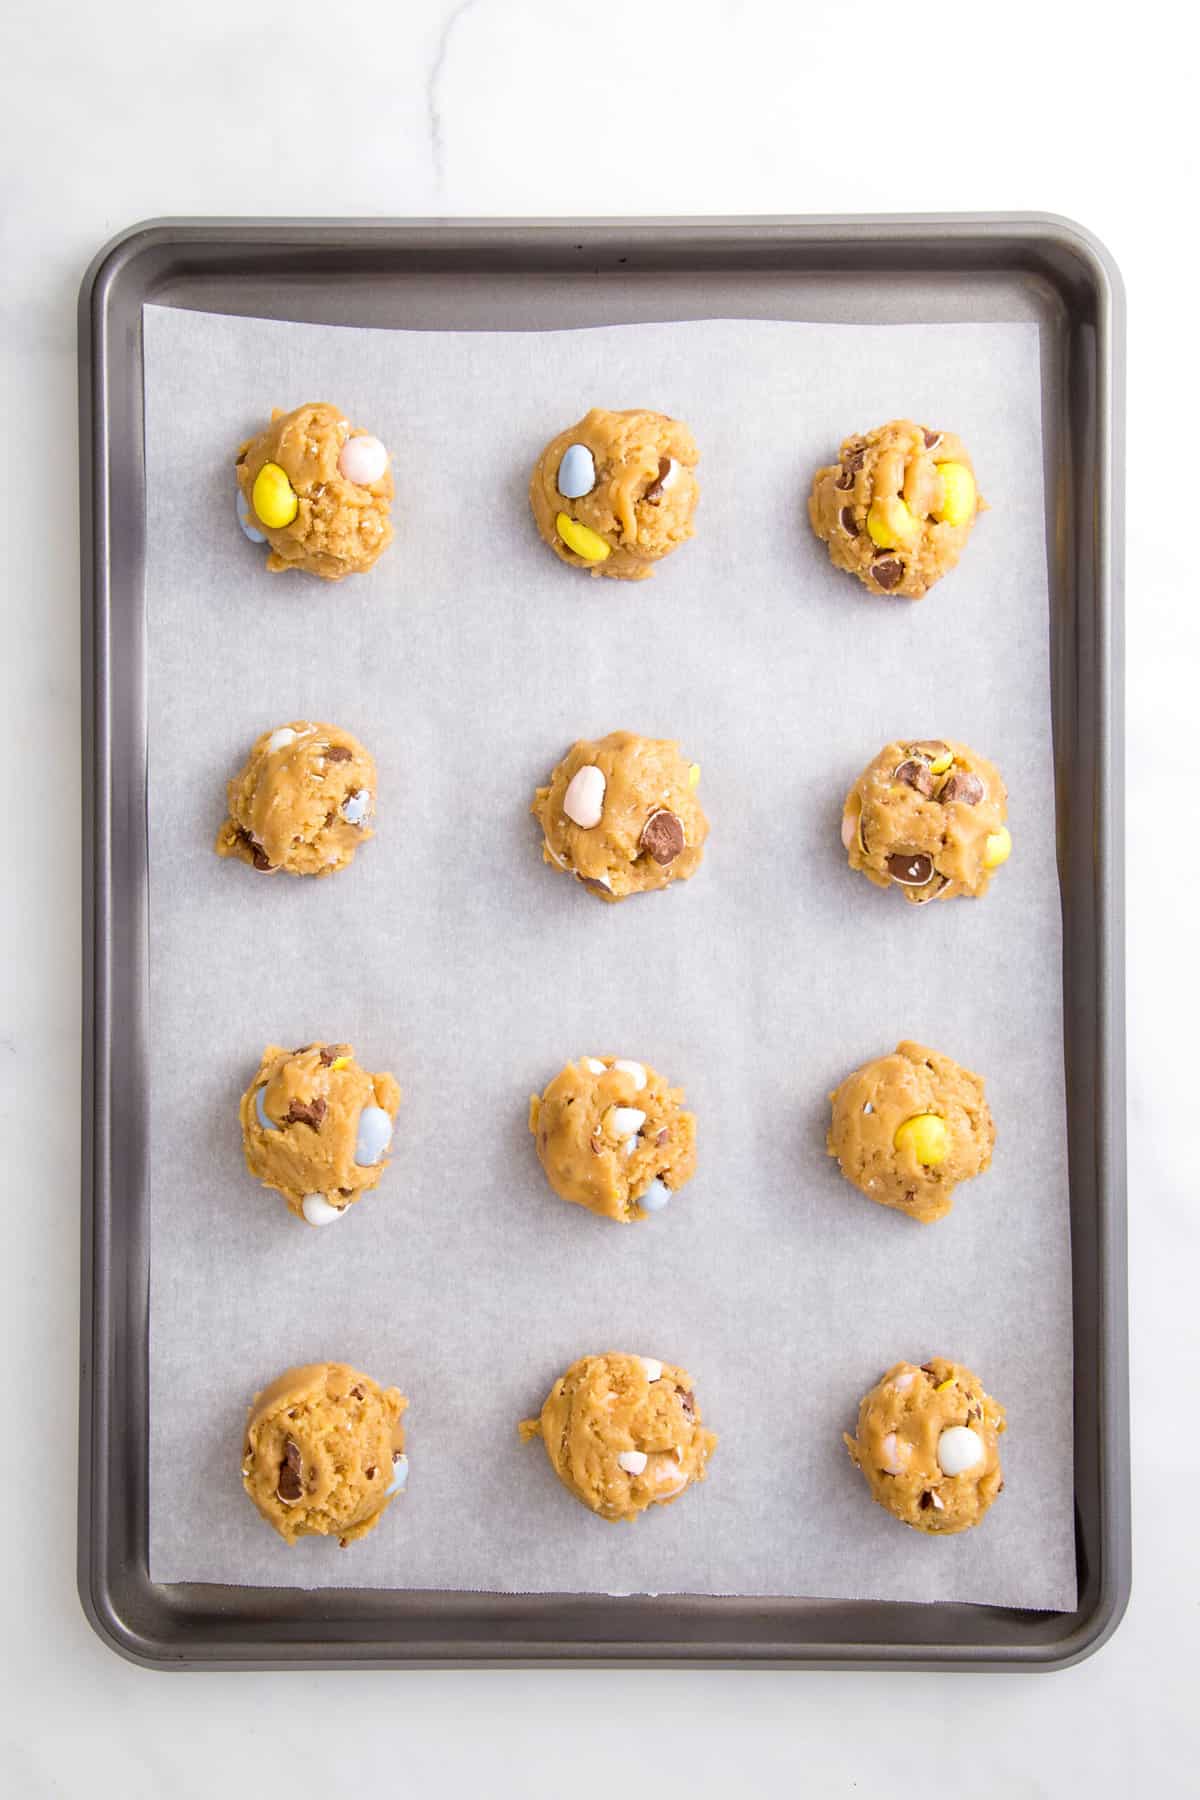 12 unbaked cadbury egg cookie dough arranged on a parchment lined baking sheet